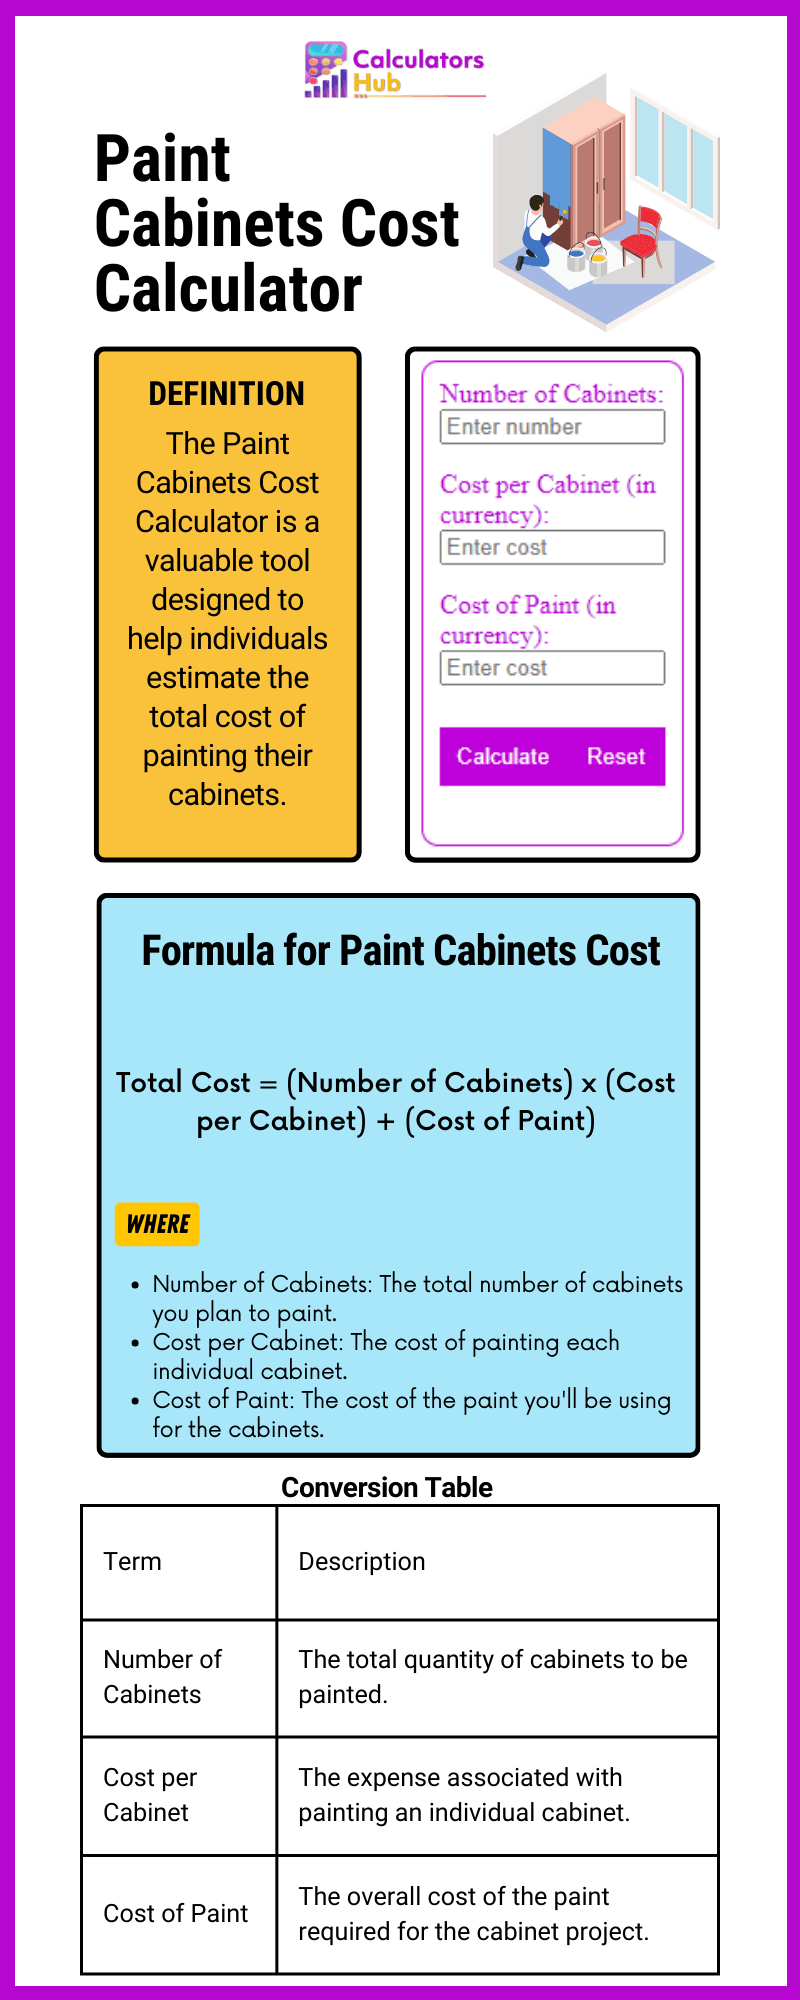 Paint Cabinets Cost Calculator